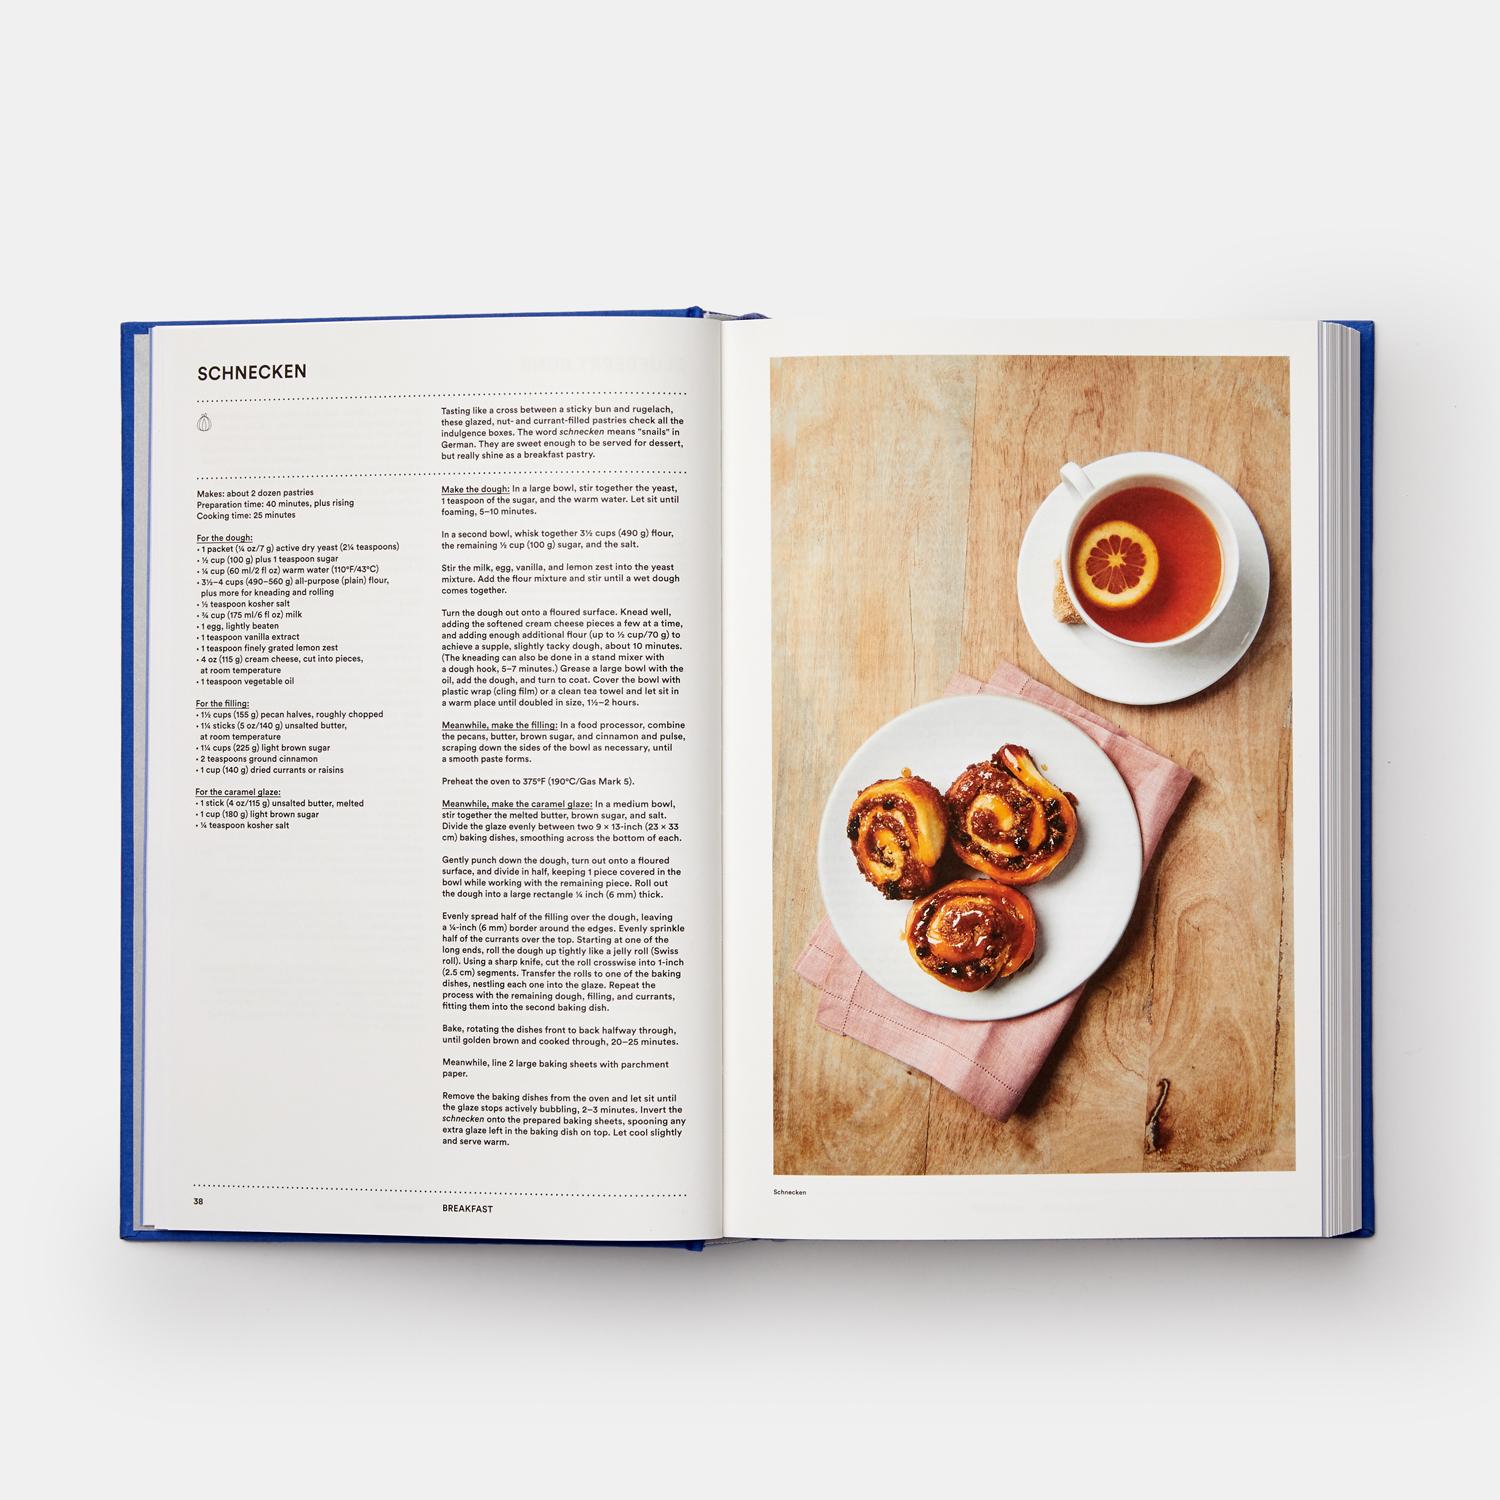 A rich trove of contemporary global Jewish cuisine, featuring hundreds of stories and recipes for home cooks everywhere

The Jewish Cookbook is an inspiring celebration of the diversity and breadth of this venerable culinary tradition. A true fusion